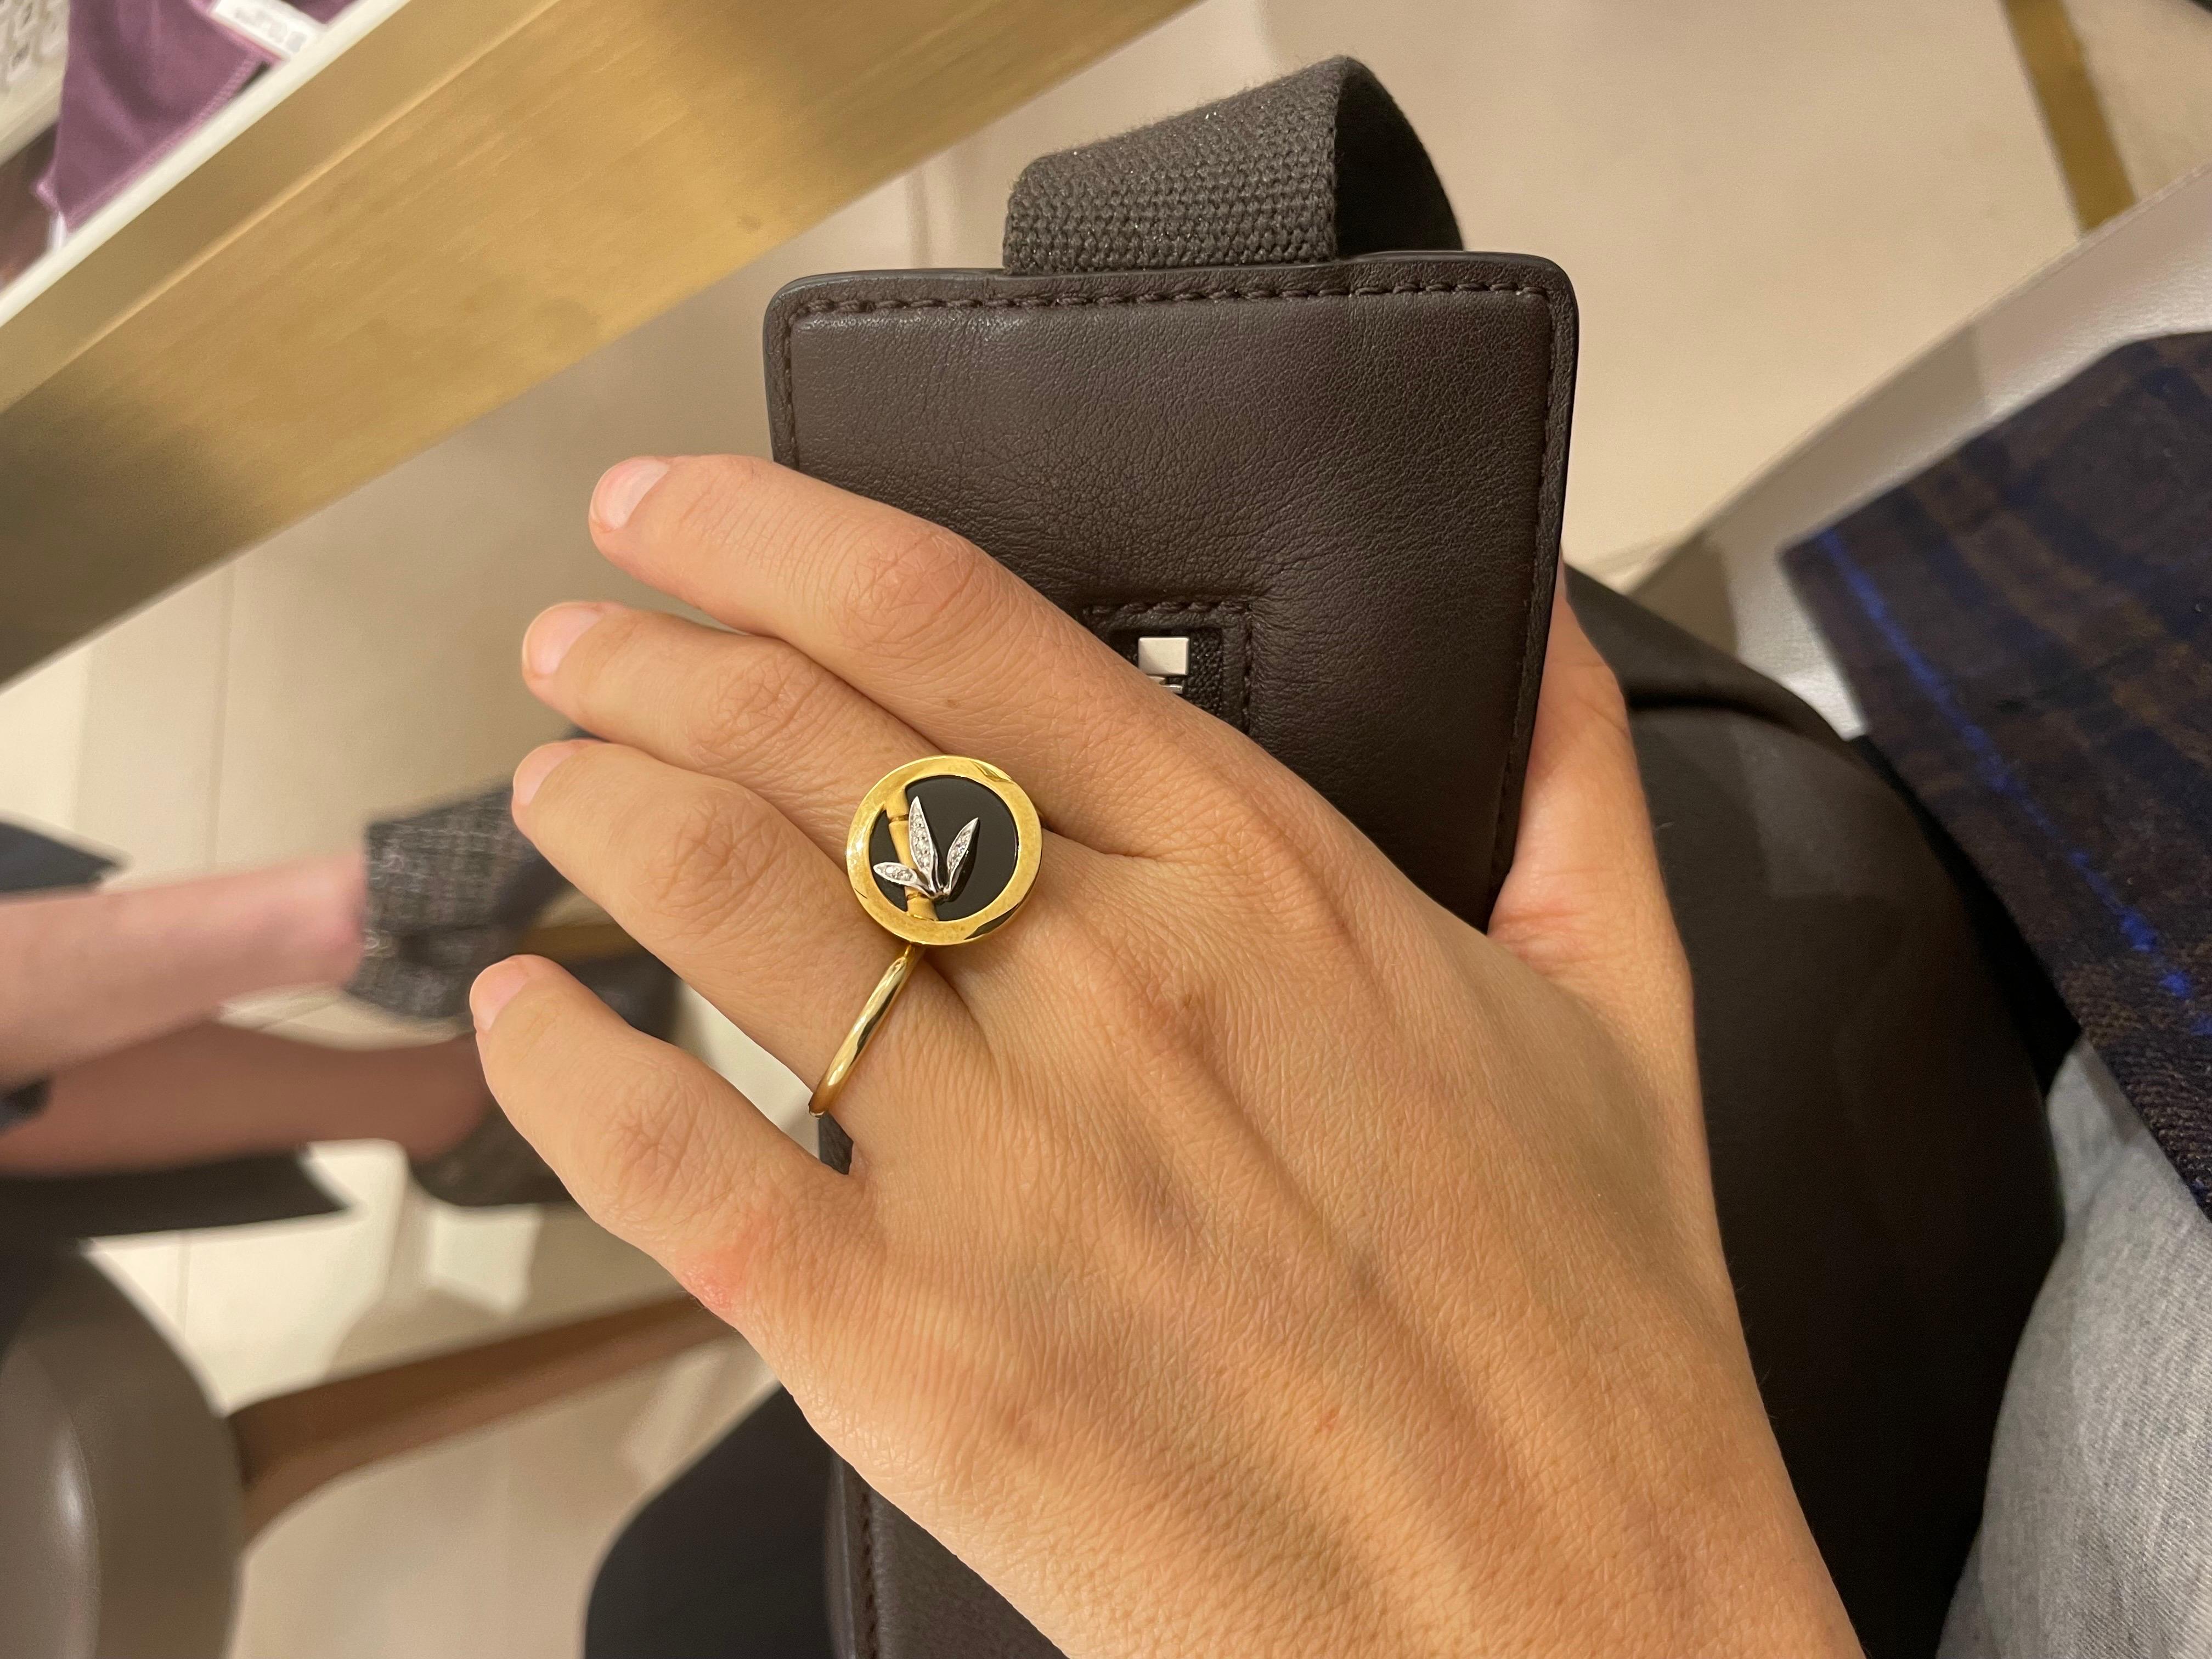 Carrera Y Carrera has built its its famous name on figurative designs, an obsession with surface finishes, and a compelling way of seeing beauty in art and nature.
This ring is the perfect example of Carrera's iconic designs. The 18 karat yellow